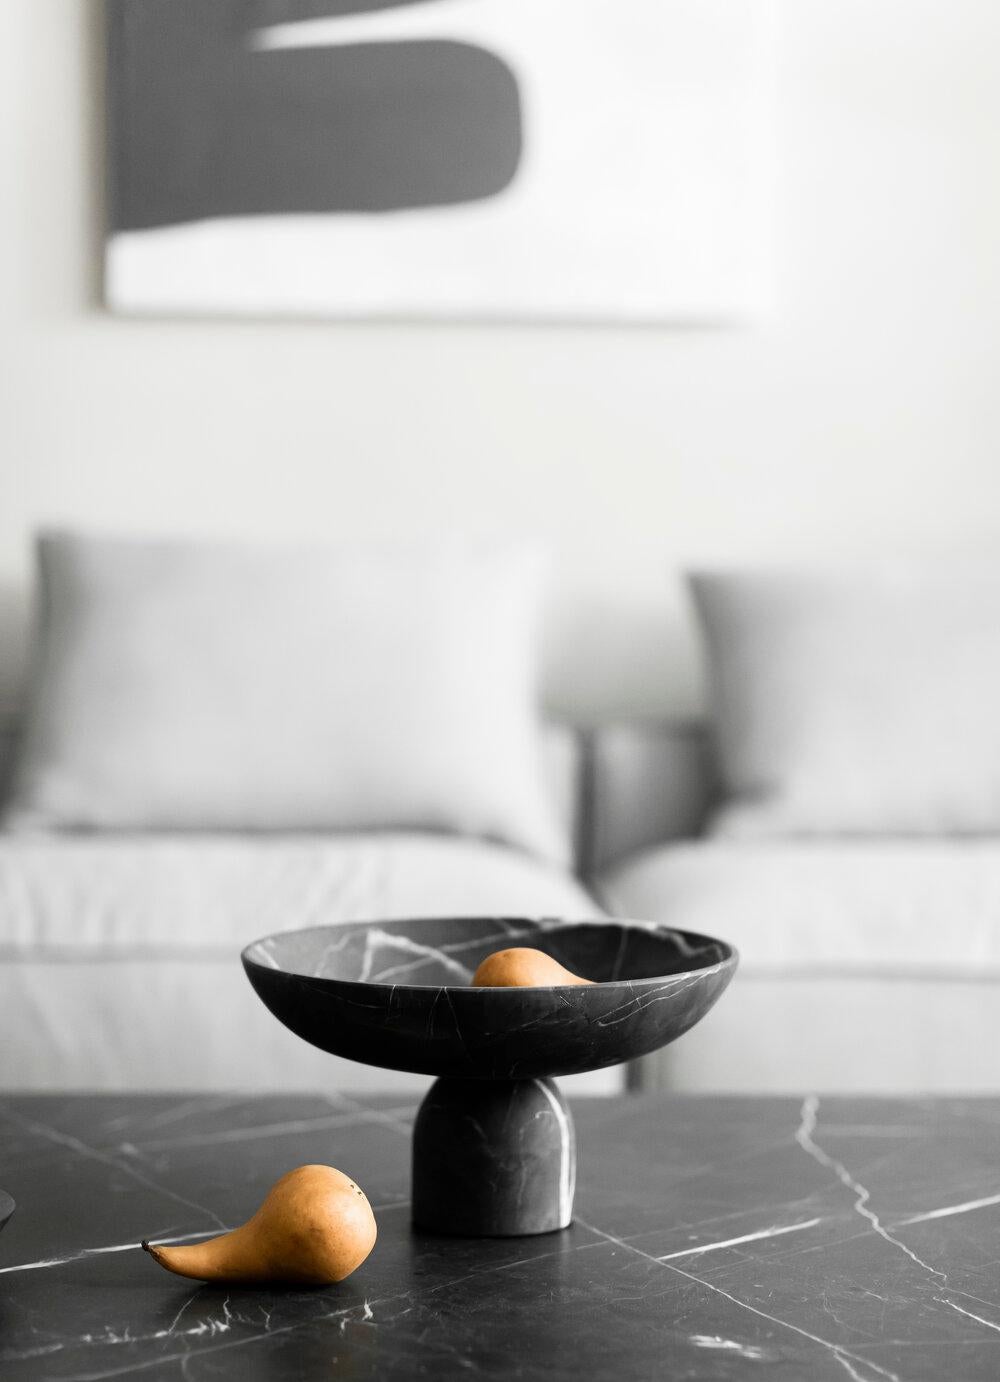 Black Marble Home Decor

These bowls are made from hand cut Negro Monterrey black marble from Neuvo Leon, Mexico. Each piece is carved from a solid block of marble and has a unique veining pattern that makes each bowl a unique work of art. We are